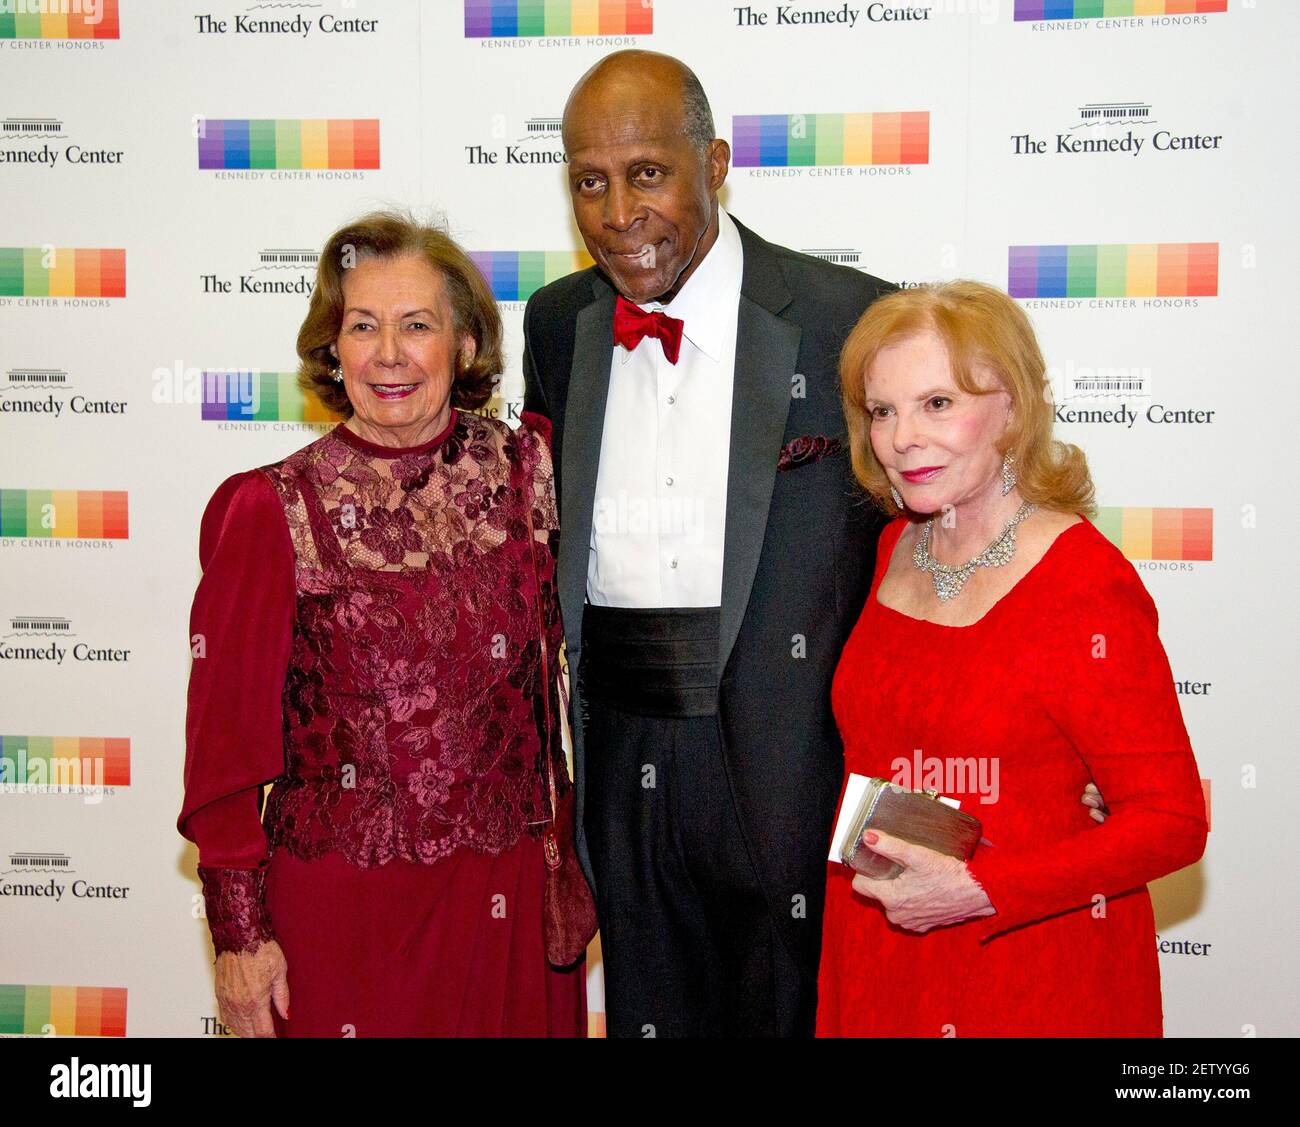 Ann Jordan, left, Vernon Jordan, center, and Buffy Cafritz, right, arrive for the formal Artist's Dinner honoring the recipients of the 39th Annual Kennedy Center Honors hosted by United States Secretary of State John F. Kerry at the U.S. Department of State in Washington, DC on Saturday, December 3, 2016. The 2016 honorees are: Argentine pianist Martha Argerich; rock band the Eagles; screen and stage actor Al Pacino; gospel and blues singer Mavis Staples; and musician James Taylor.Credit: Ron Sachs/Pool via CNP | usage worldwide Stock Photo